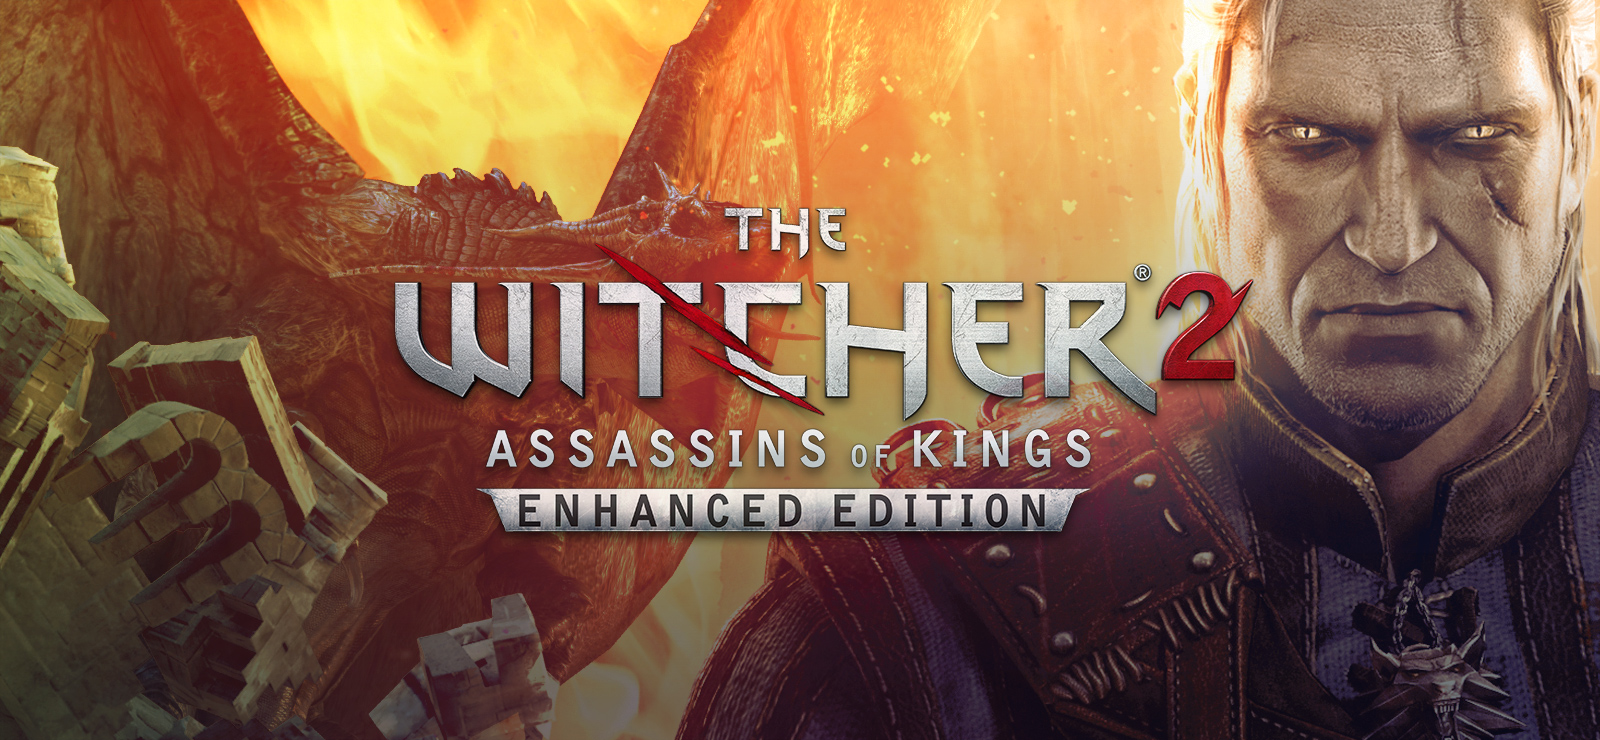 BESTSELLER - The Witcher 2: Assassins Of Kings Enhanced Edition